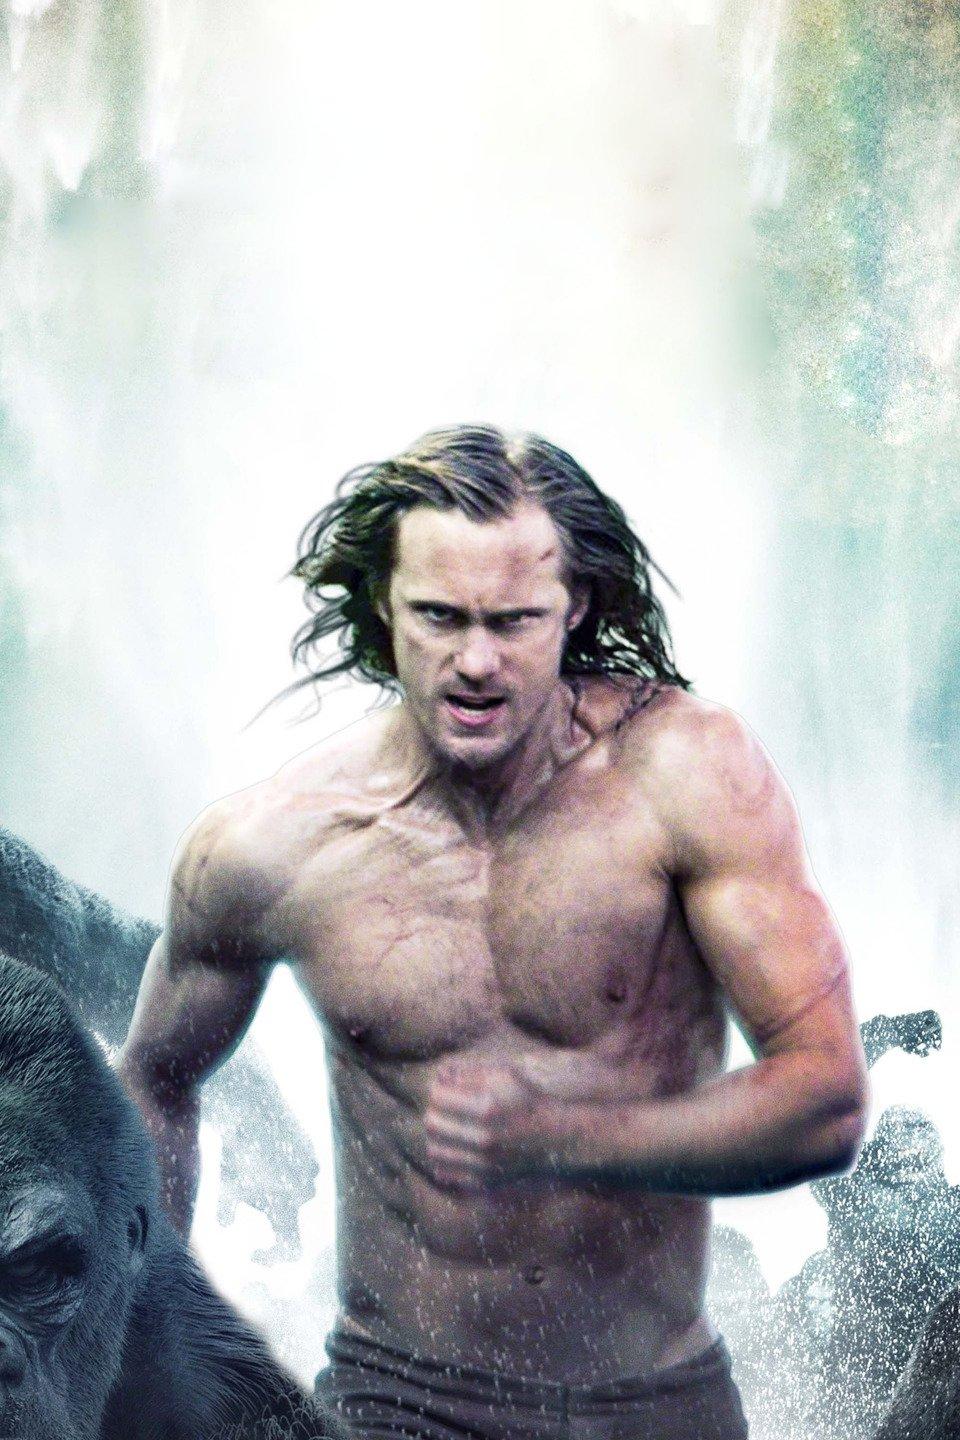 Tarzan (2013) Picture - Image Abyss